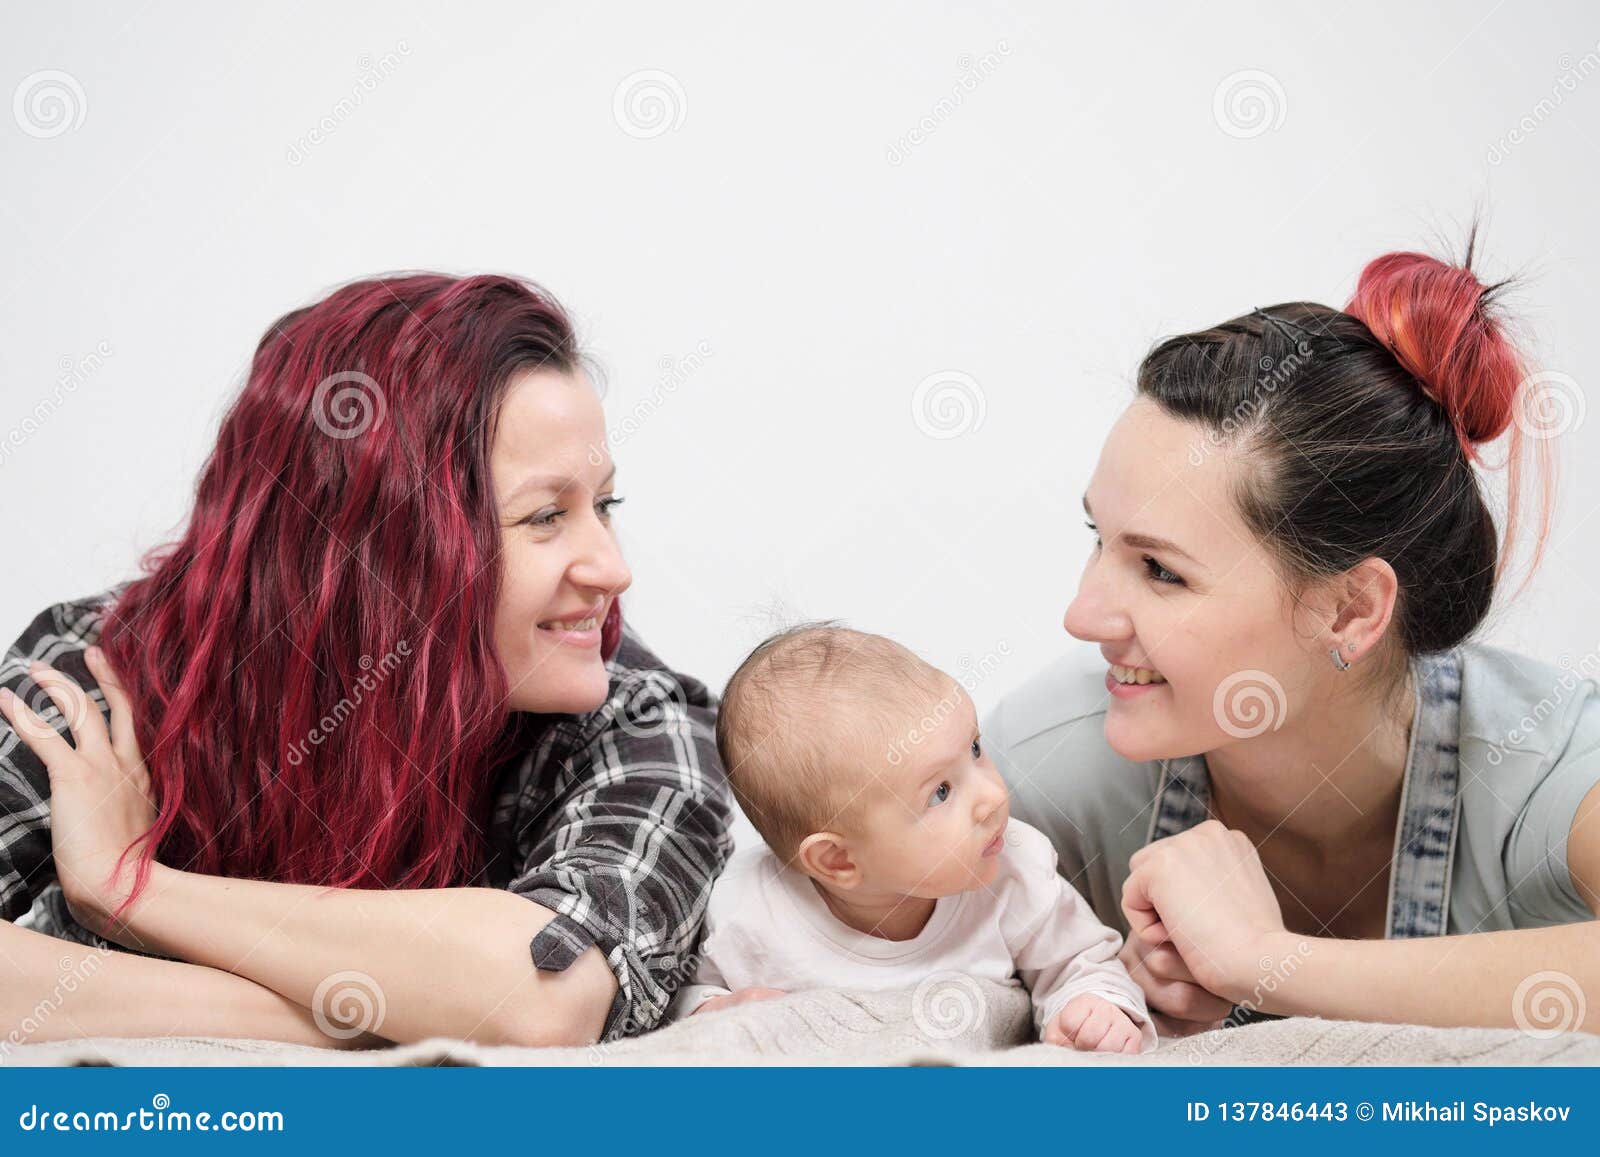 Two Young Women with a Baby on a White Background